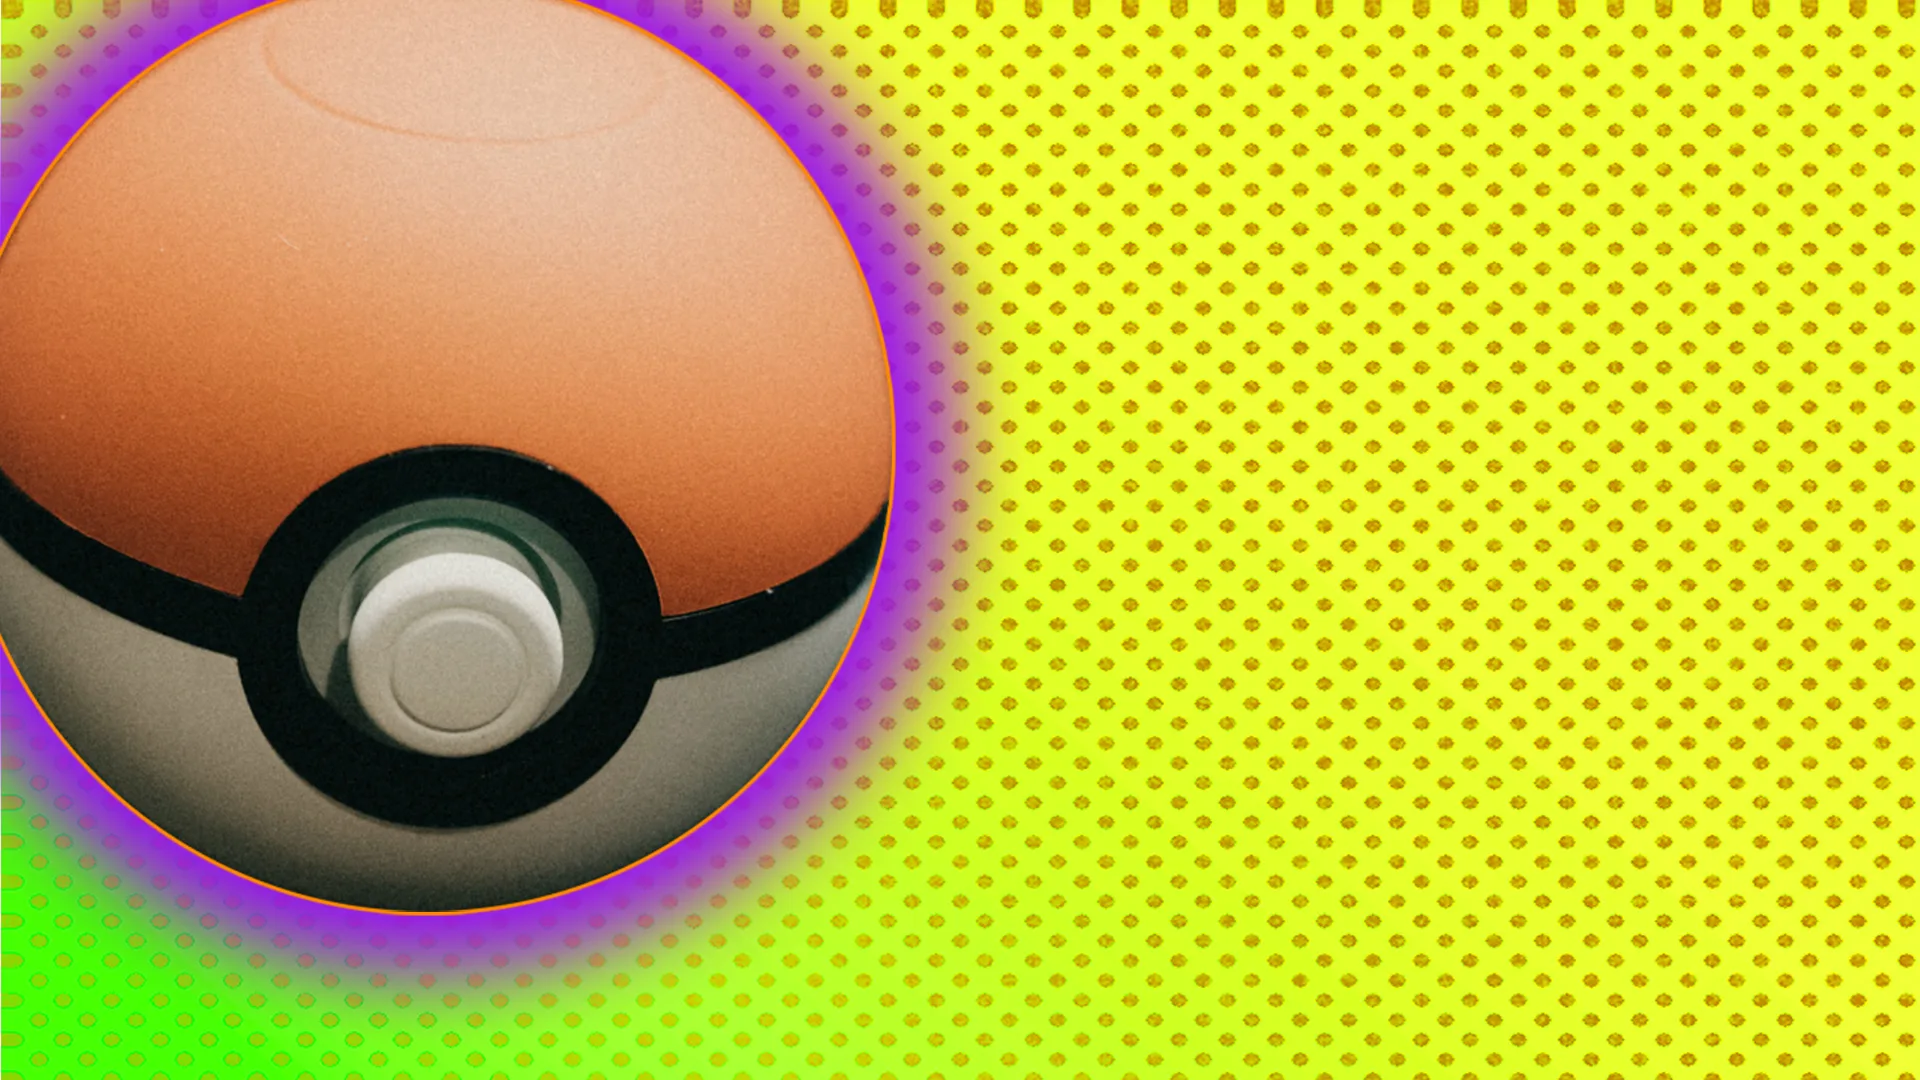 Pokemon ball with a purple glow on a yellow spotted background